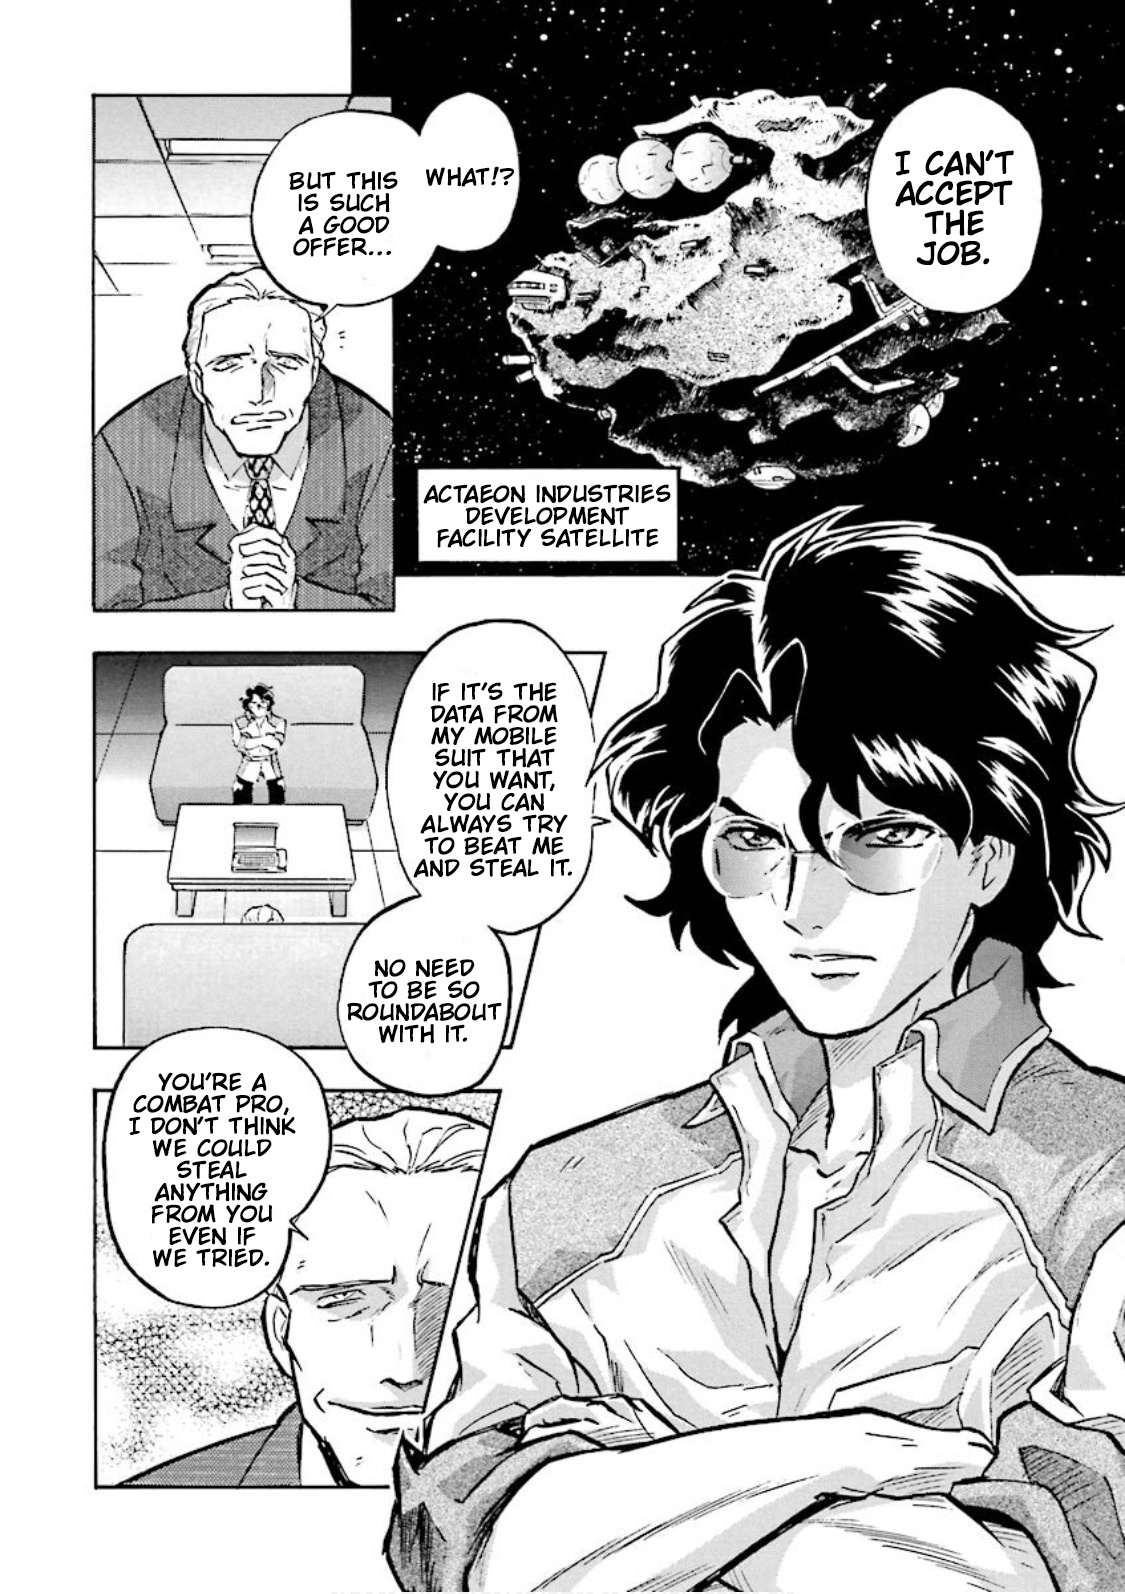 Mobile Suit Gundam Seed Astray Re:master Edition Vol.1 Chapter 5: Target: Red Frame - Picture 2